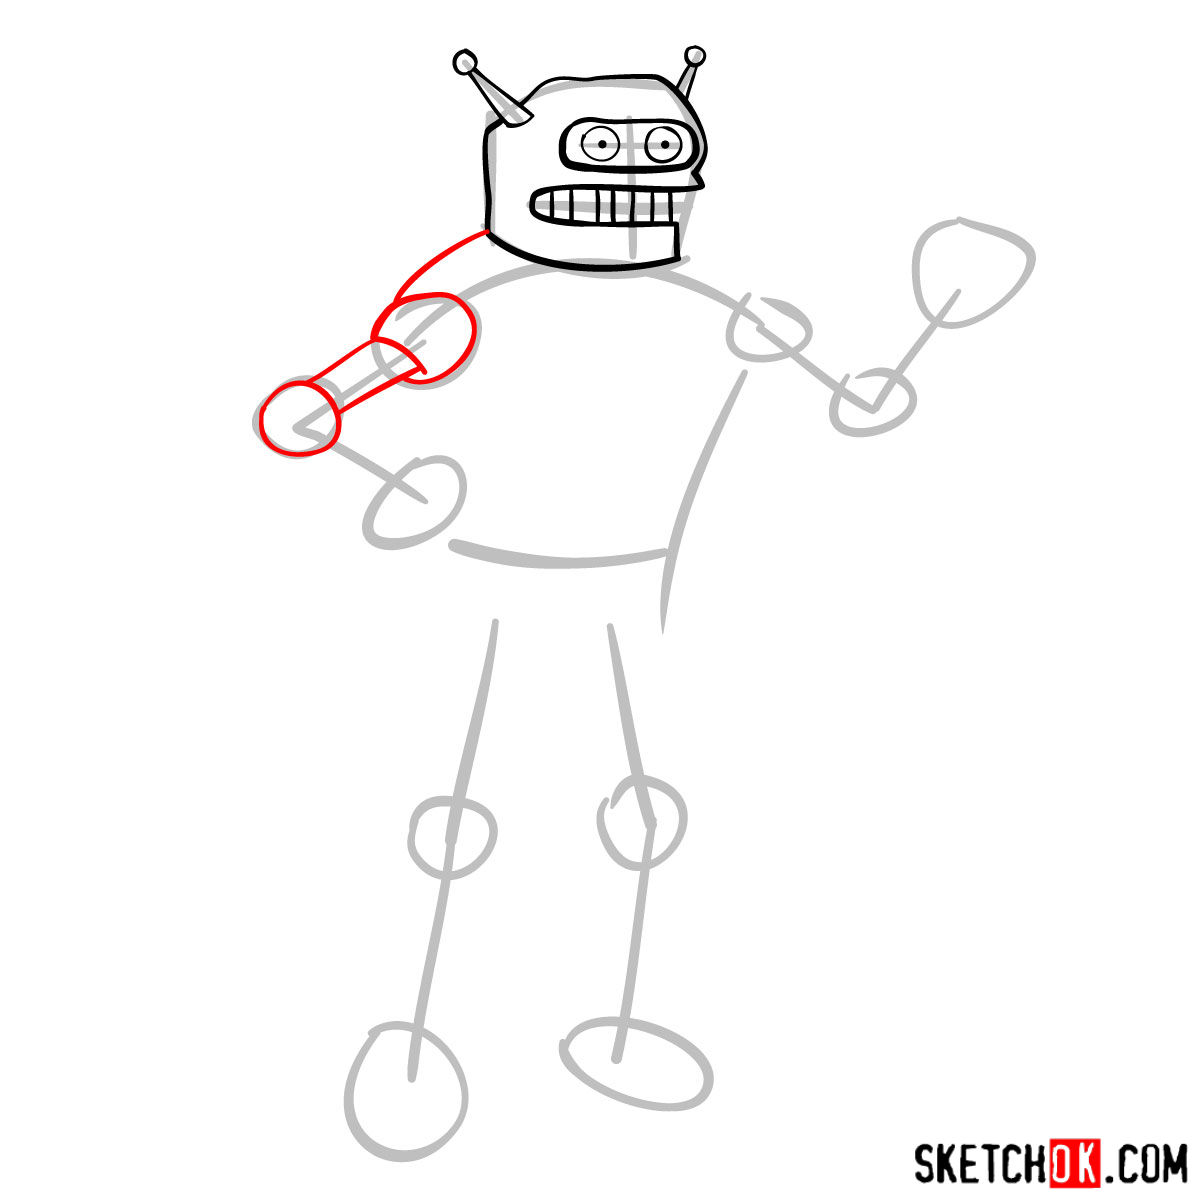 How to draw Calculon from Futurama - step 04